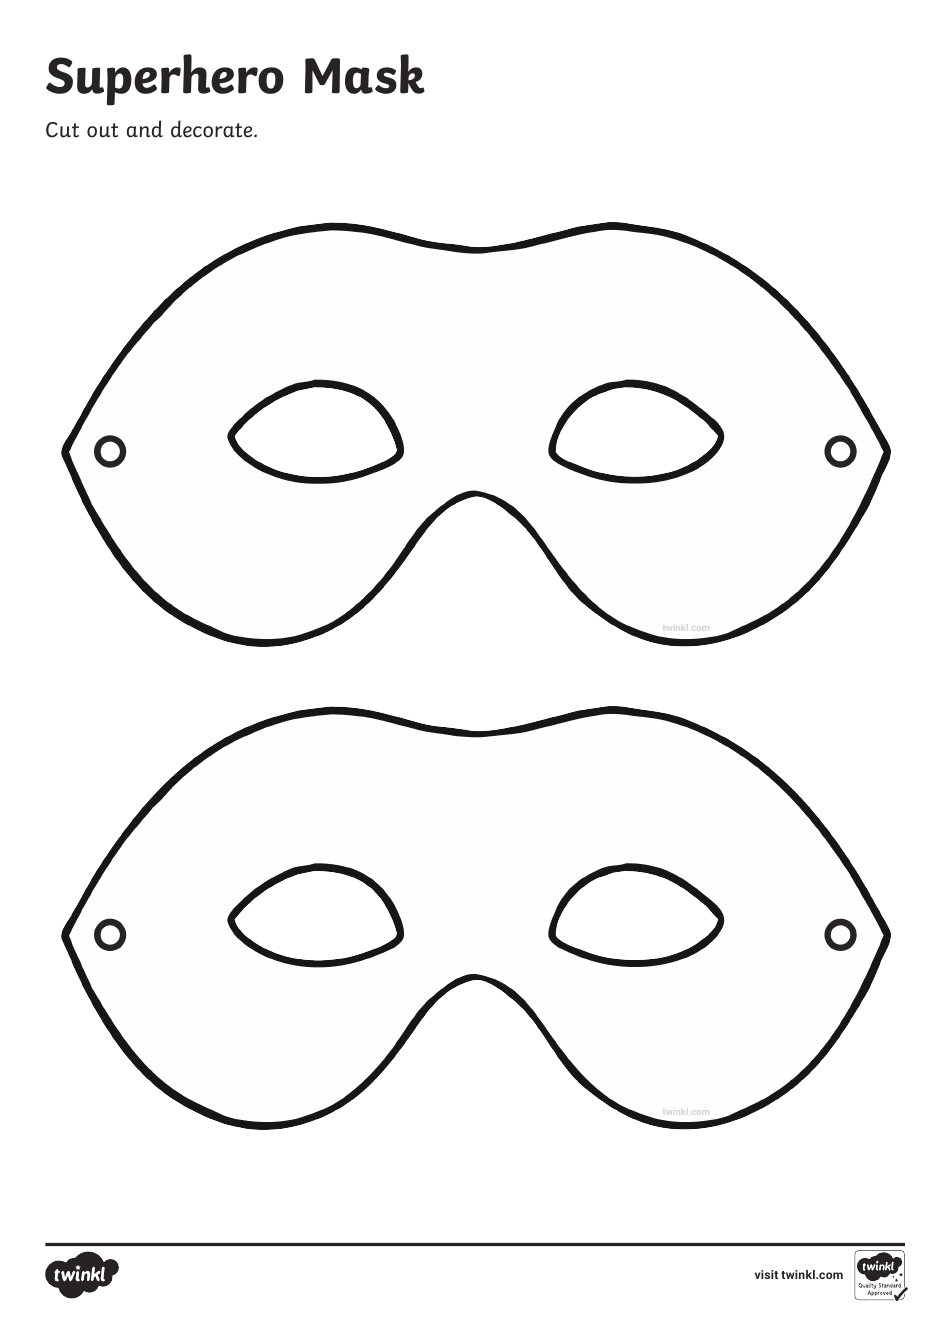 Superhero Mask Coloring Template - Preview image category